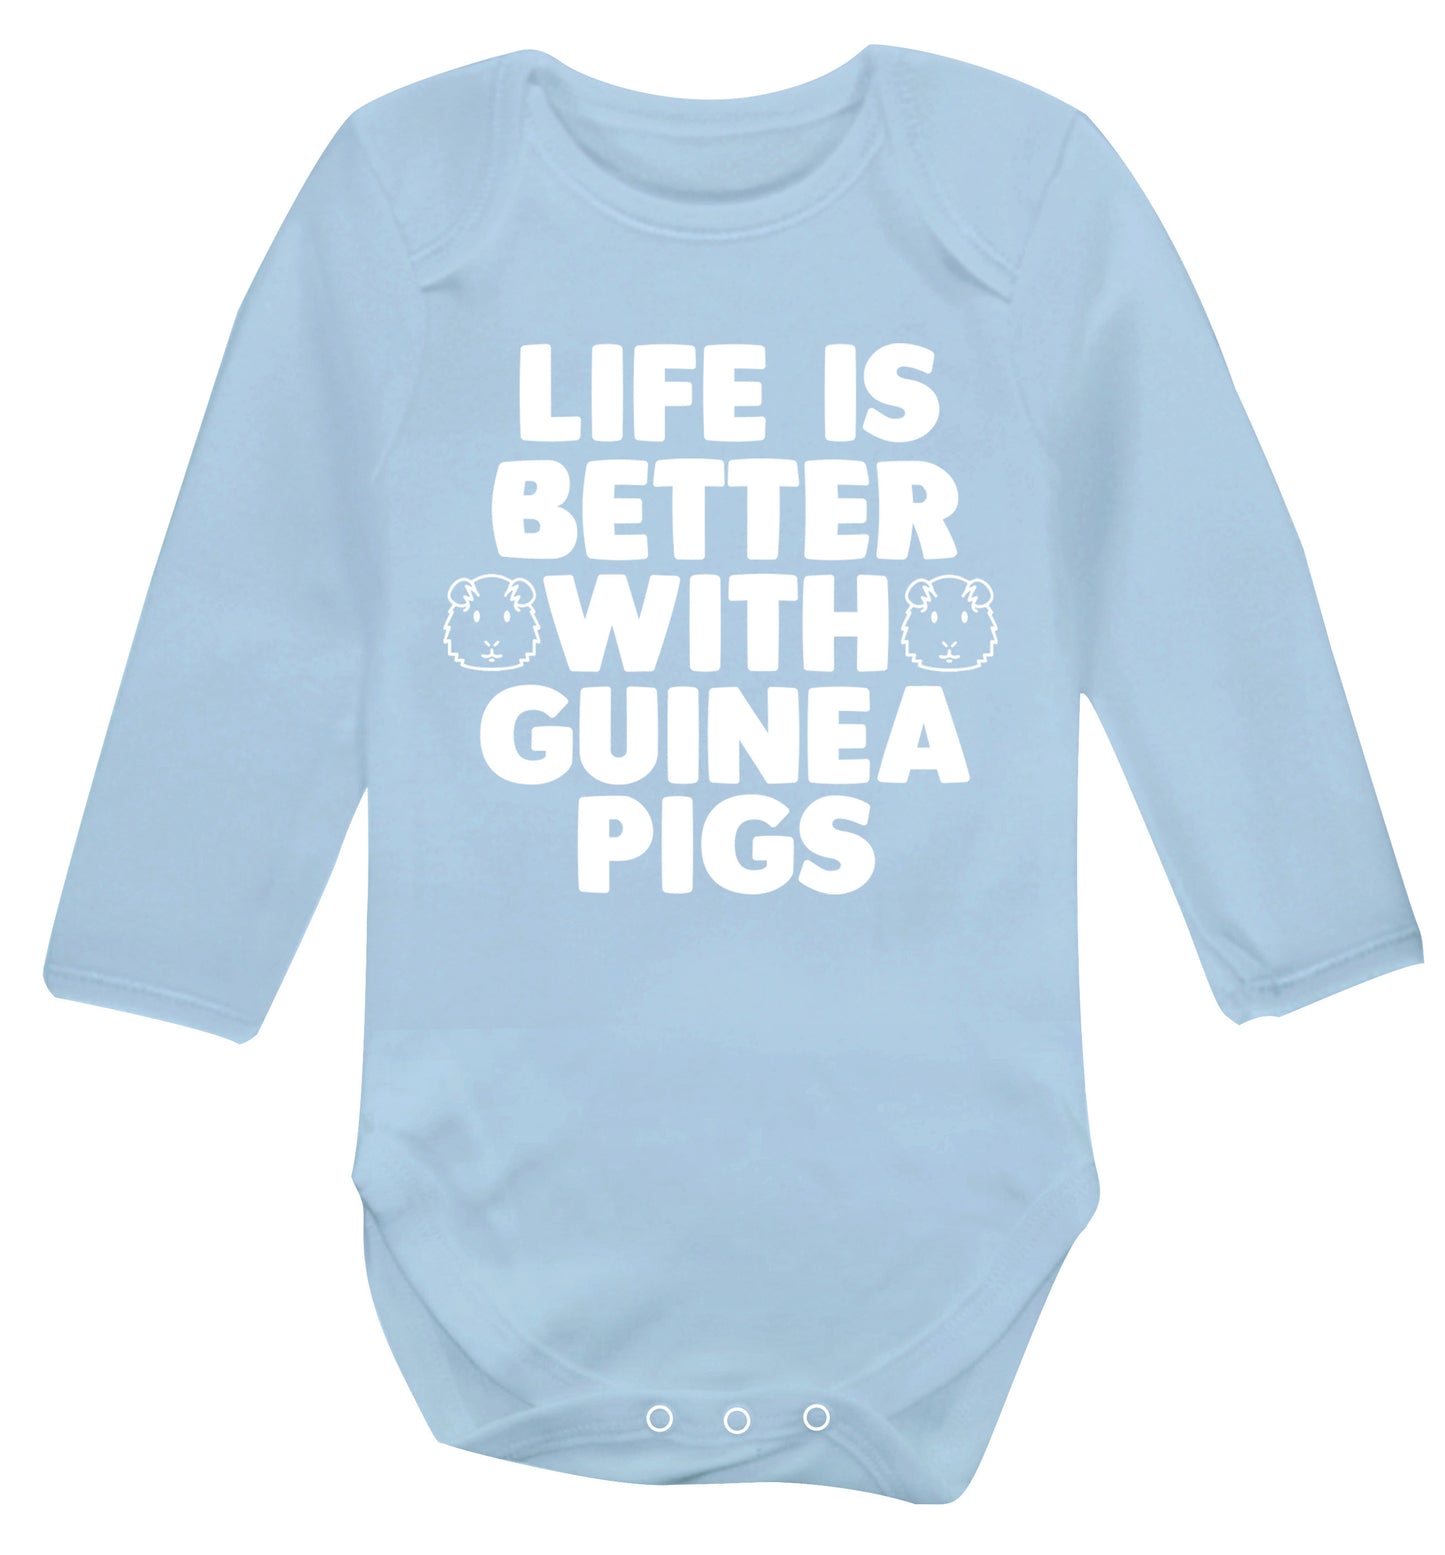 Life is better with guinea pigs Baby Vest long sleeved pale blue 6-12 months